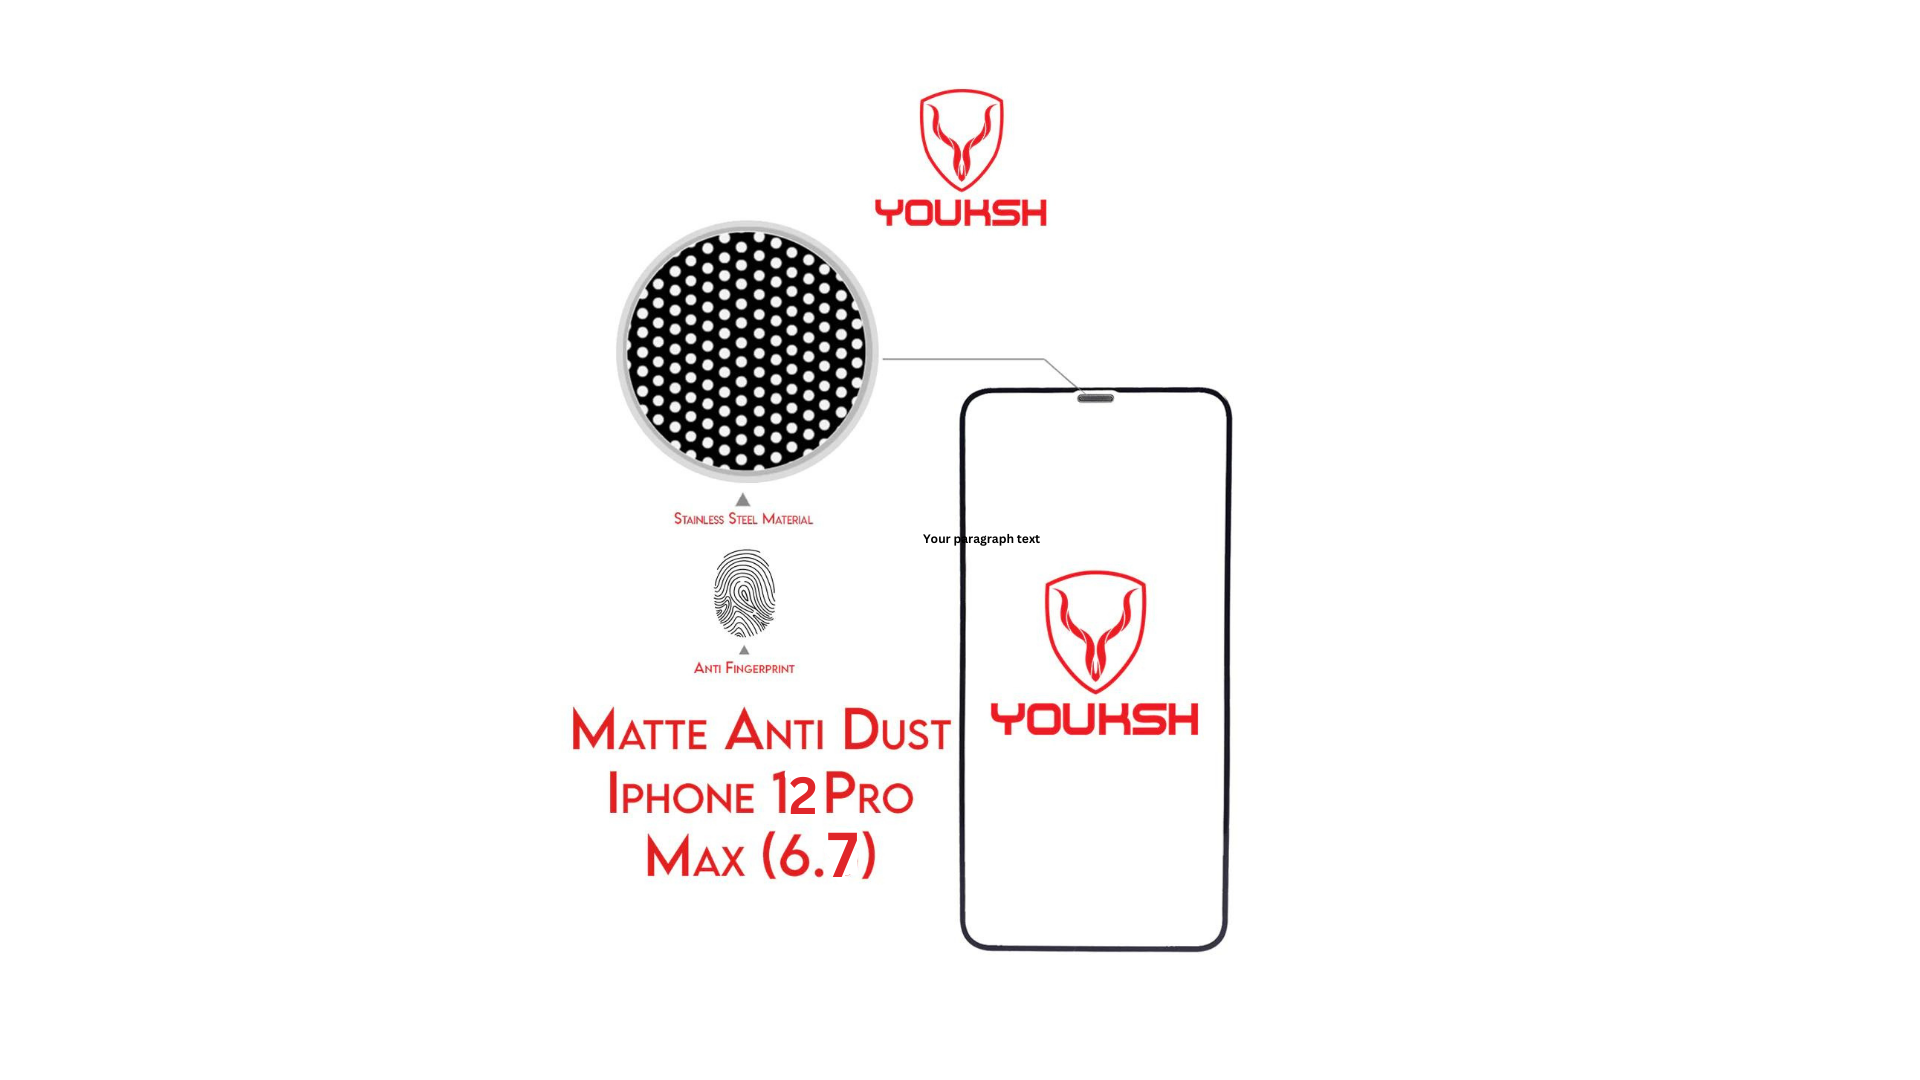 YOUKSH Apple iPhone 12 Pro Max Anti Static Glass Protector With YOUKSH Installation Kit